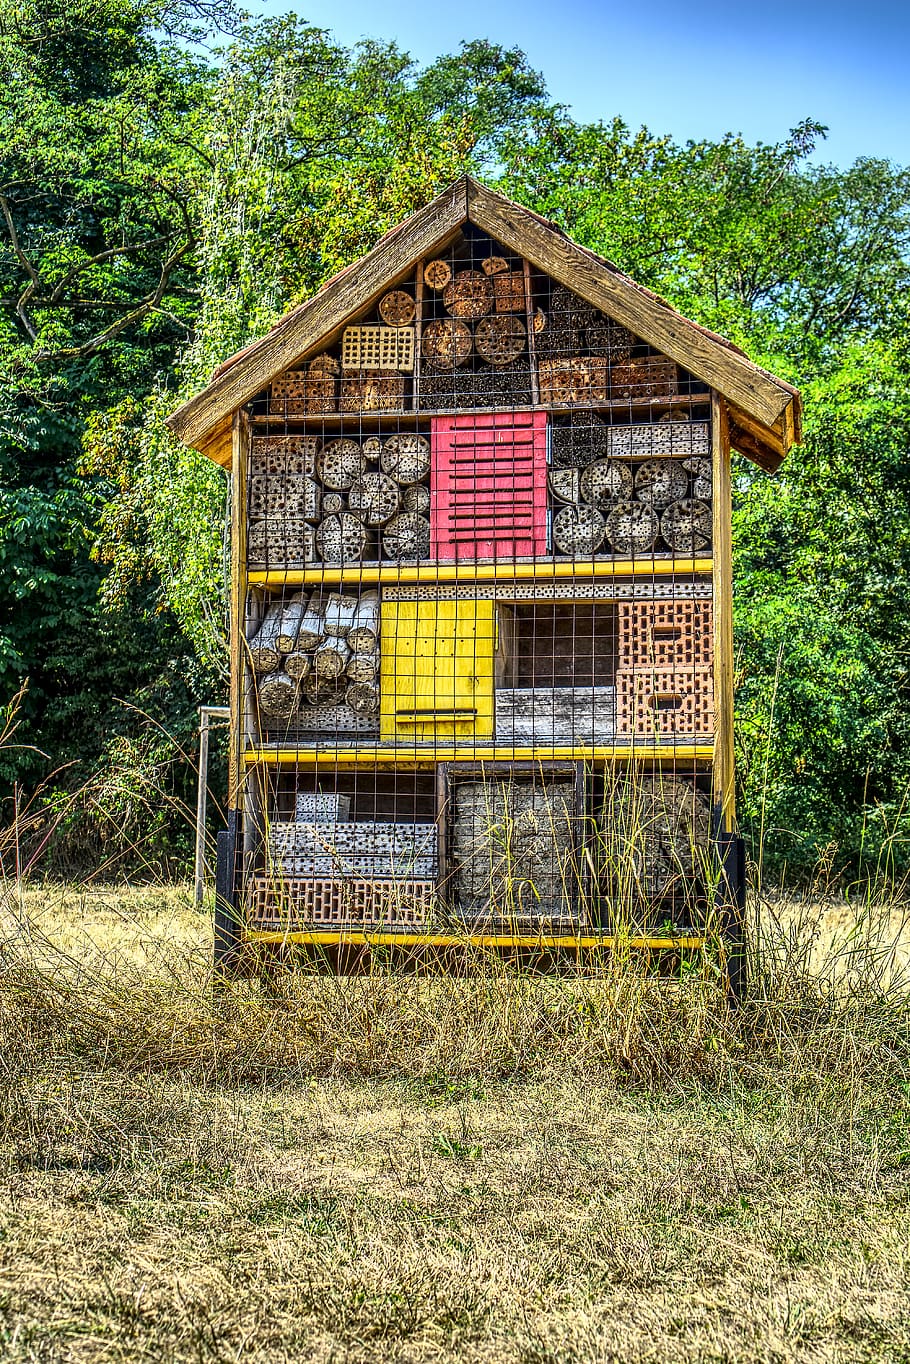 insect hotel, hotel, bee, nature, decorative, garden, insect box, insect house, nature conservation, protect